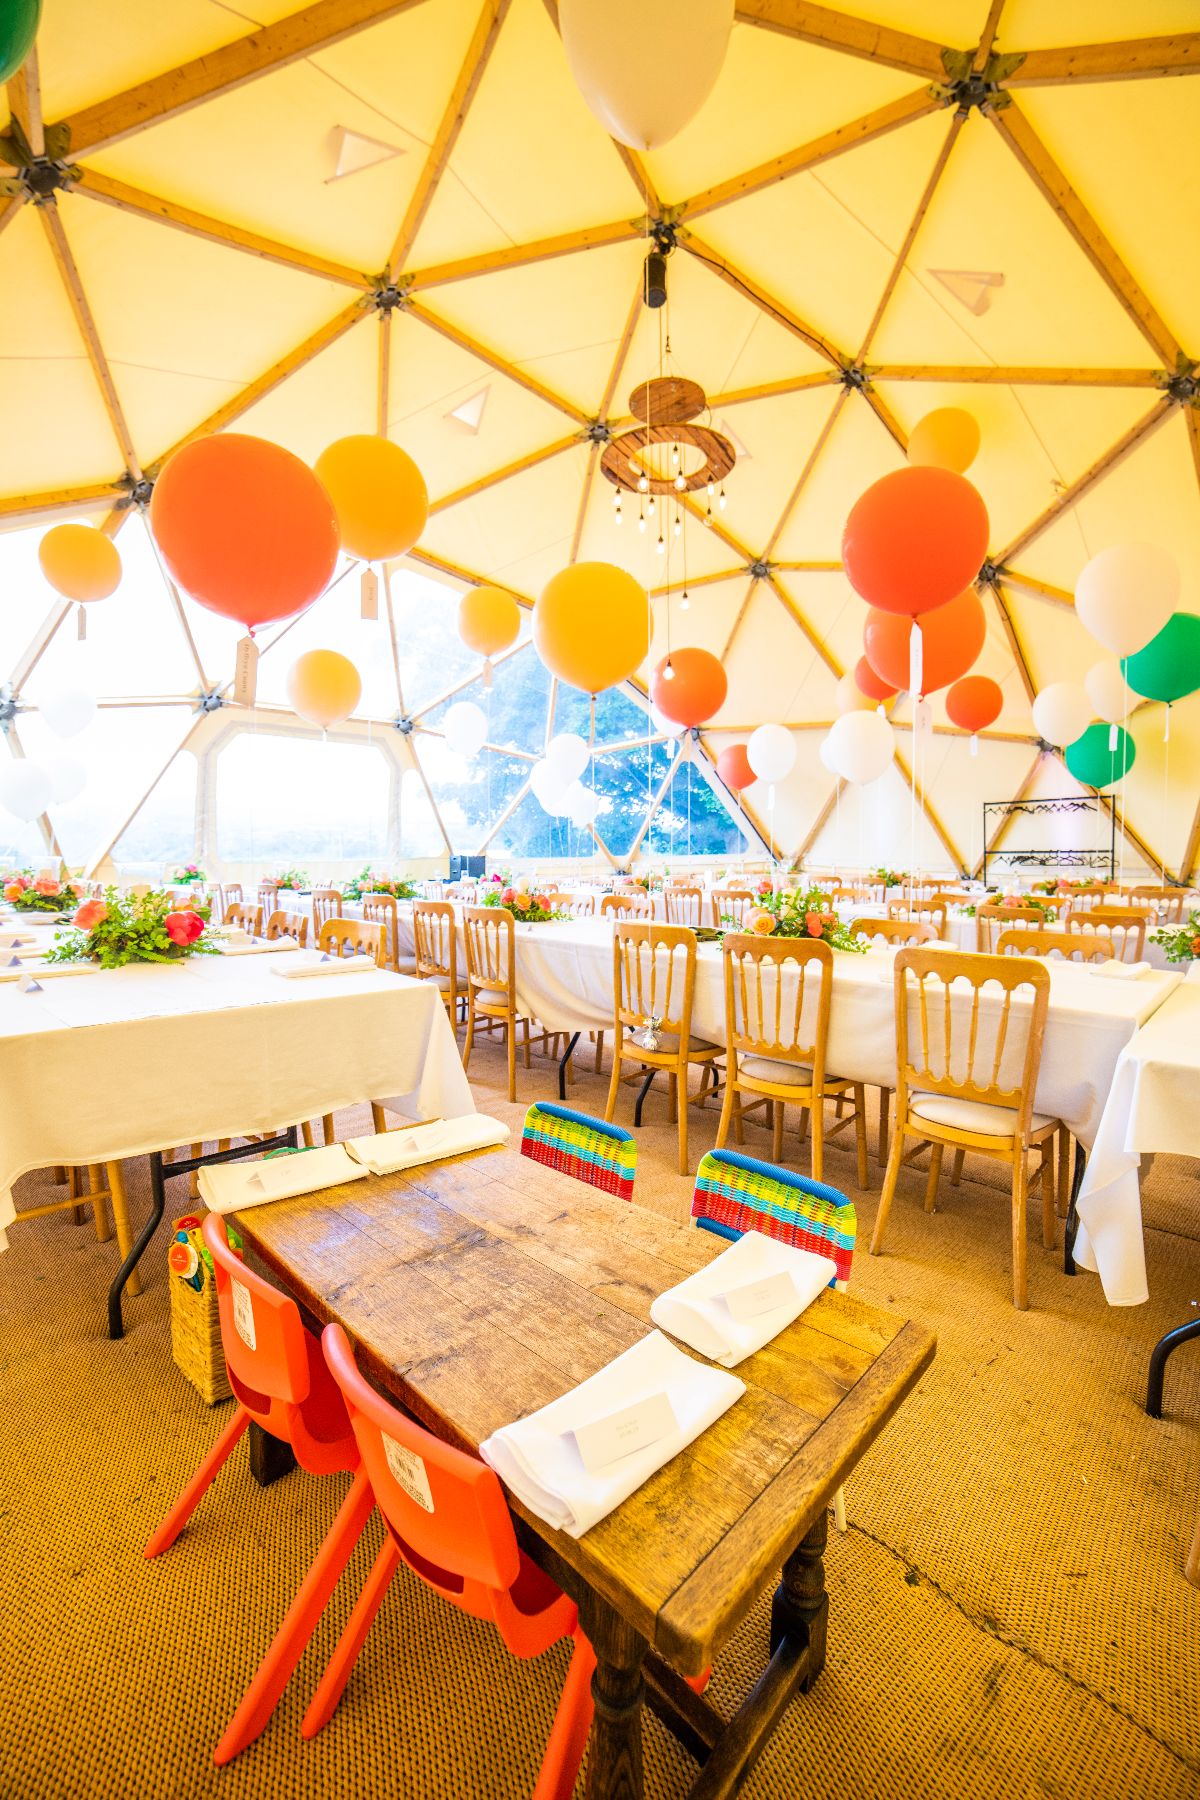 Gallery Item 13 for Event In A Tent